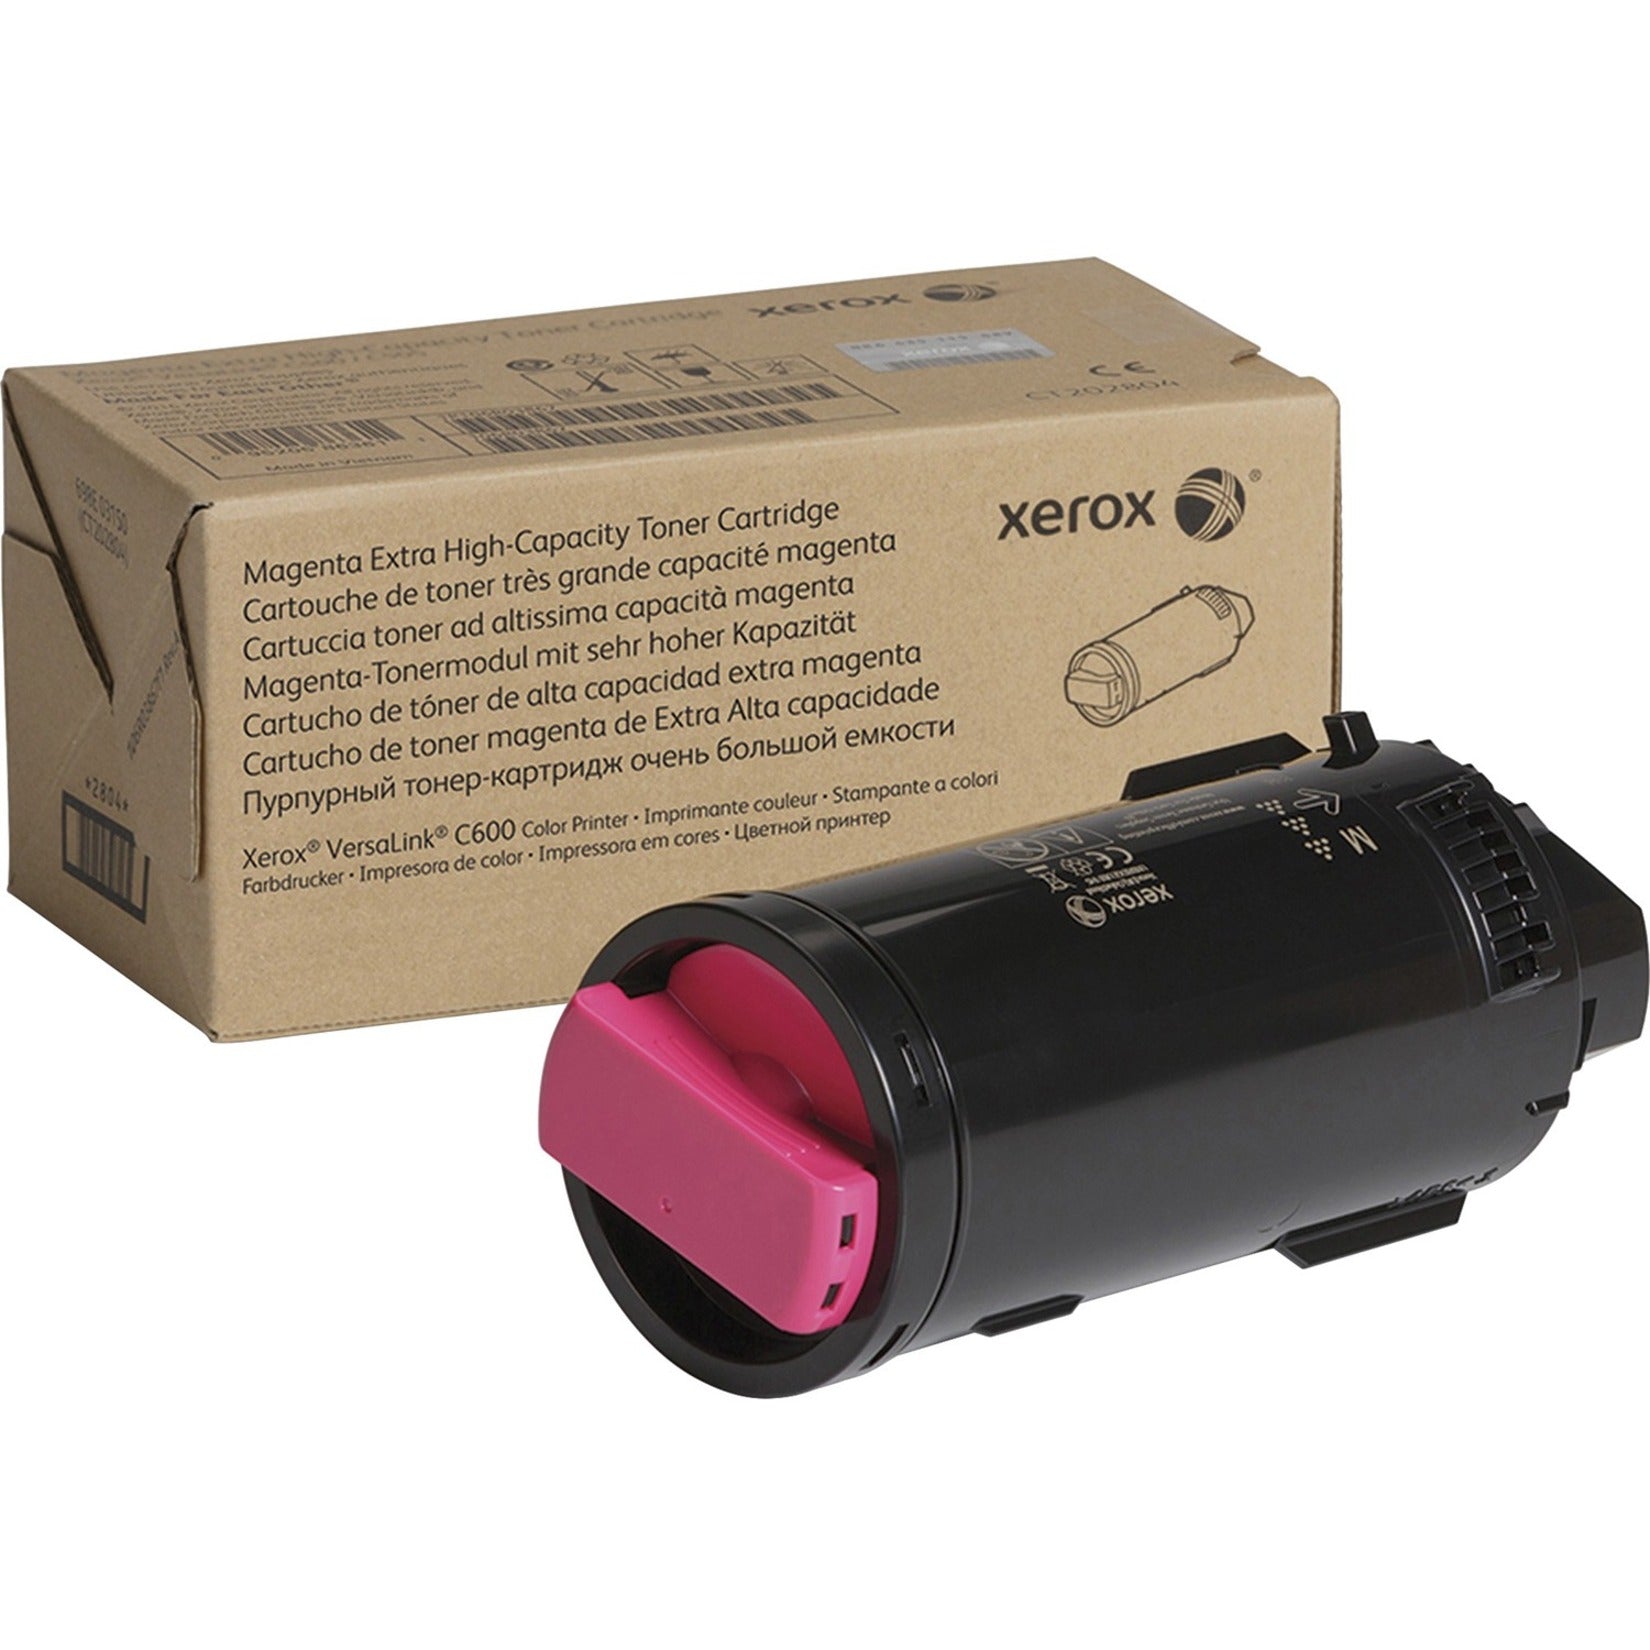 Xerox 106R04007 Toner Cartridge, Extra High Yield, Magenta, 16800 Pages